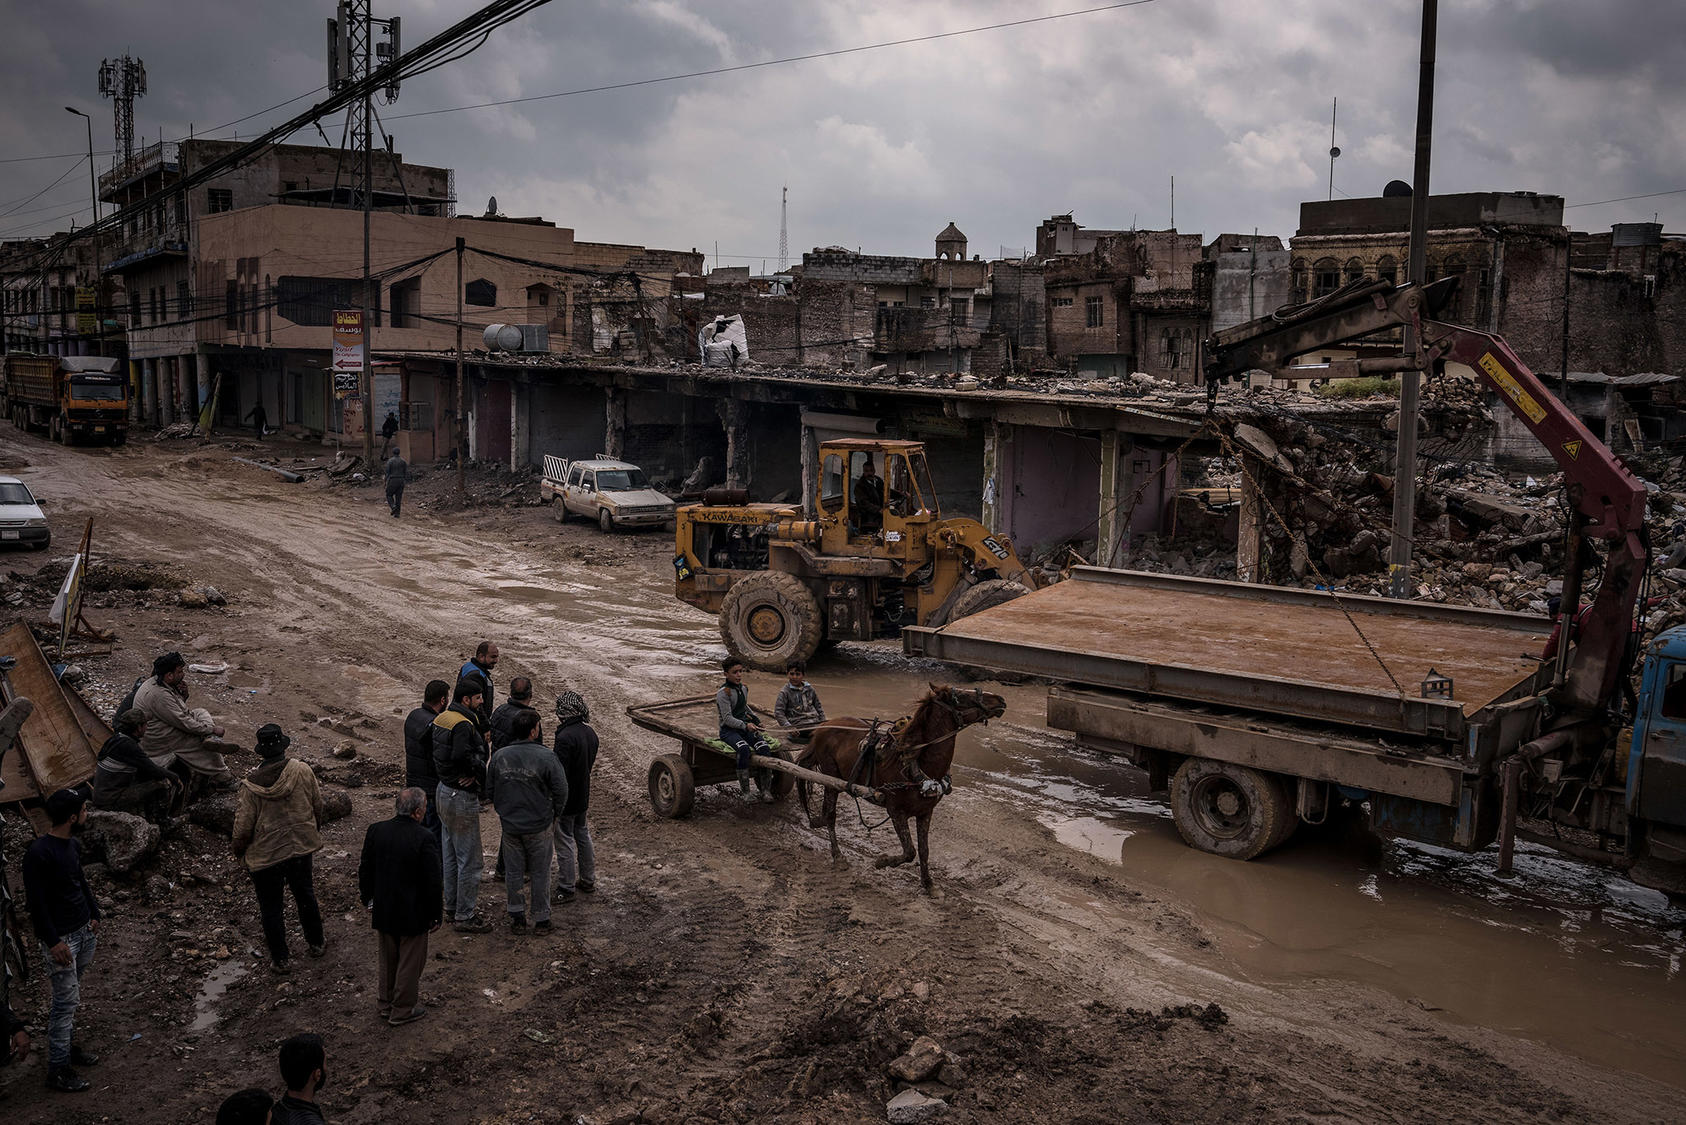 Workers collect the scrap metal from ruined buildings in the Old City of Mosul, Iraq, on March 28, 2019. 